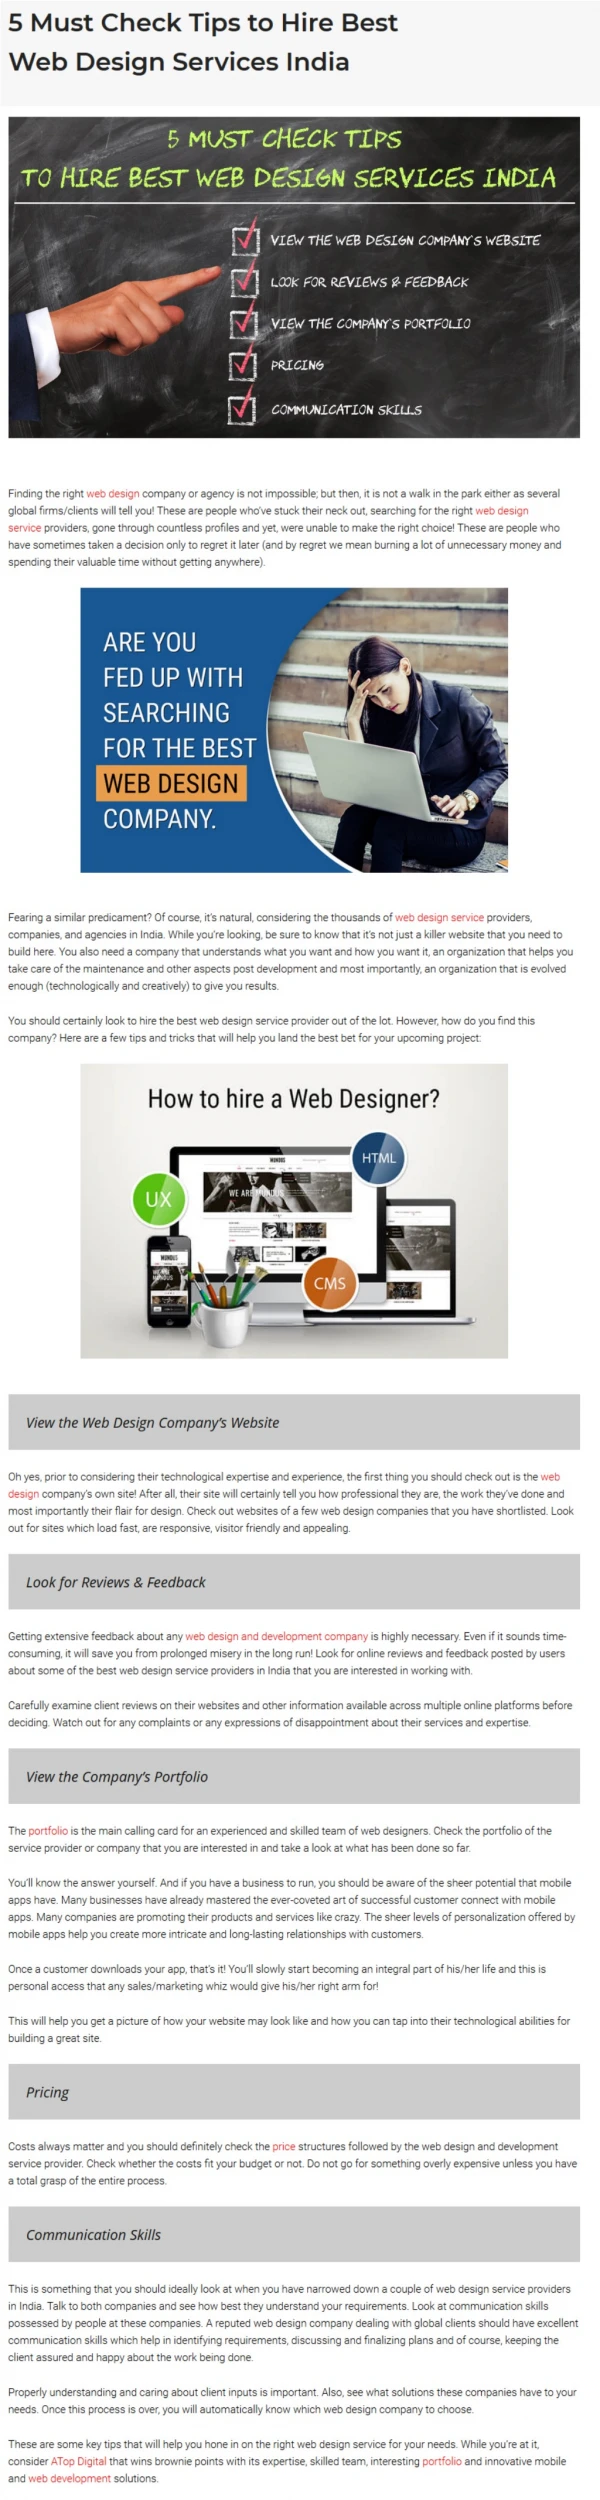 5 Must Check Tips: To Hire Best Web Design Services In India